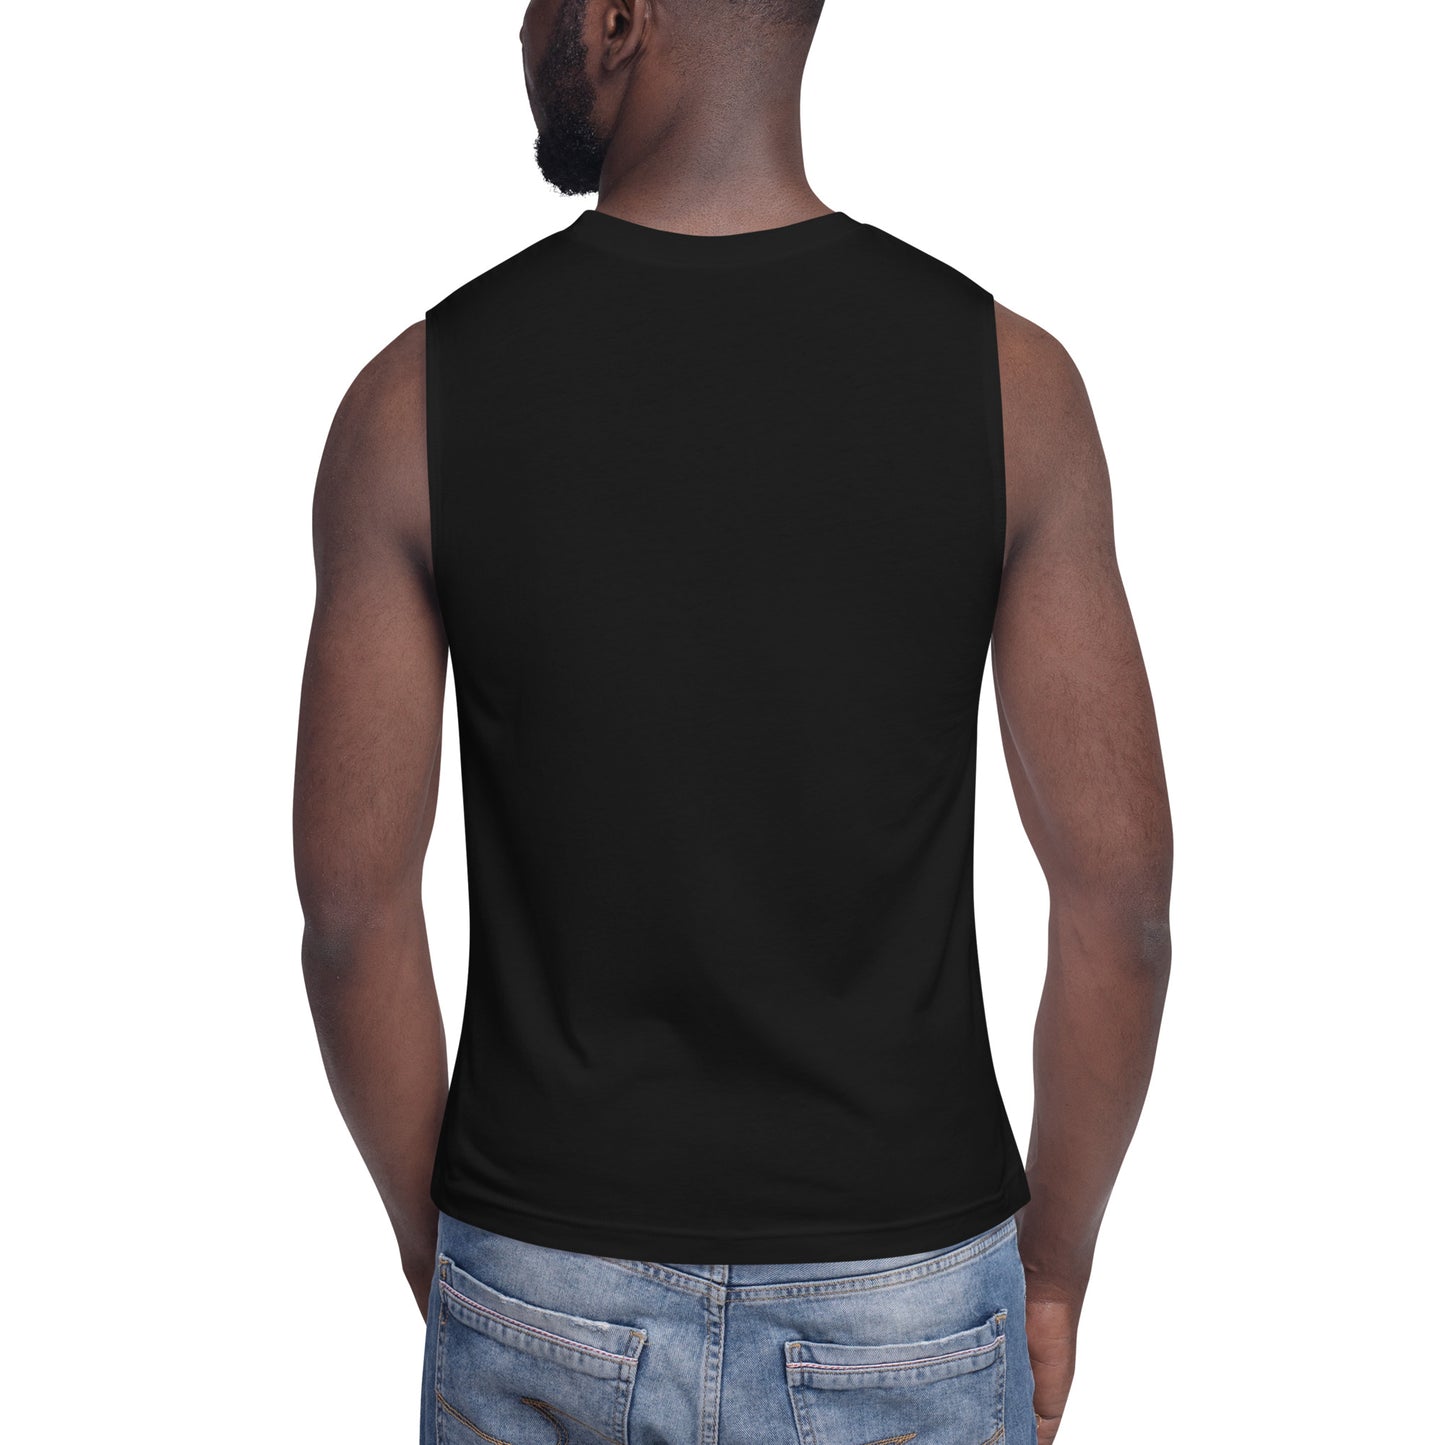 YOU ARE NOT ALONE Muscle Shirt